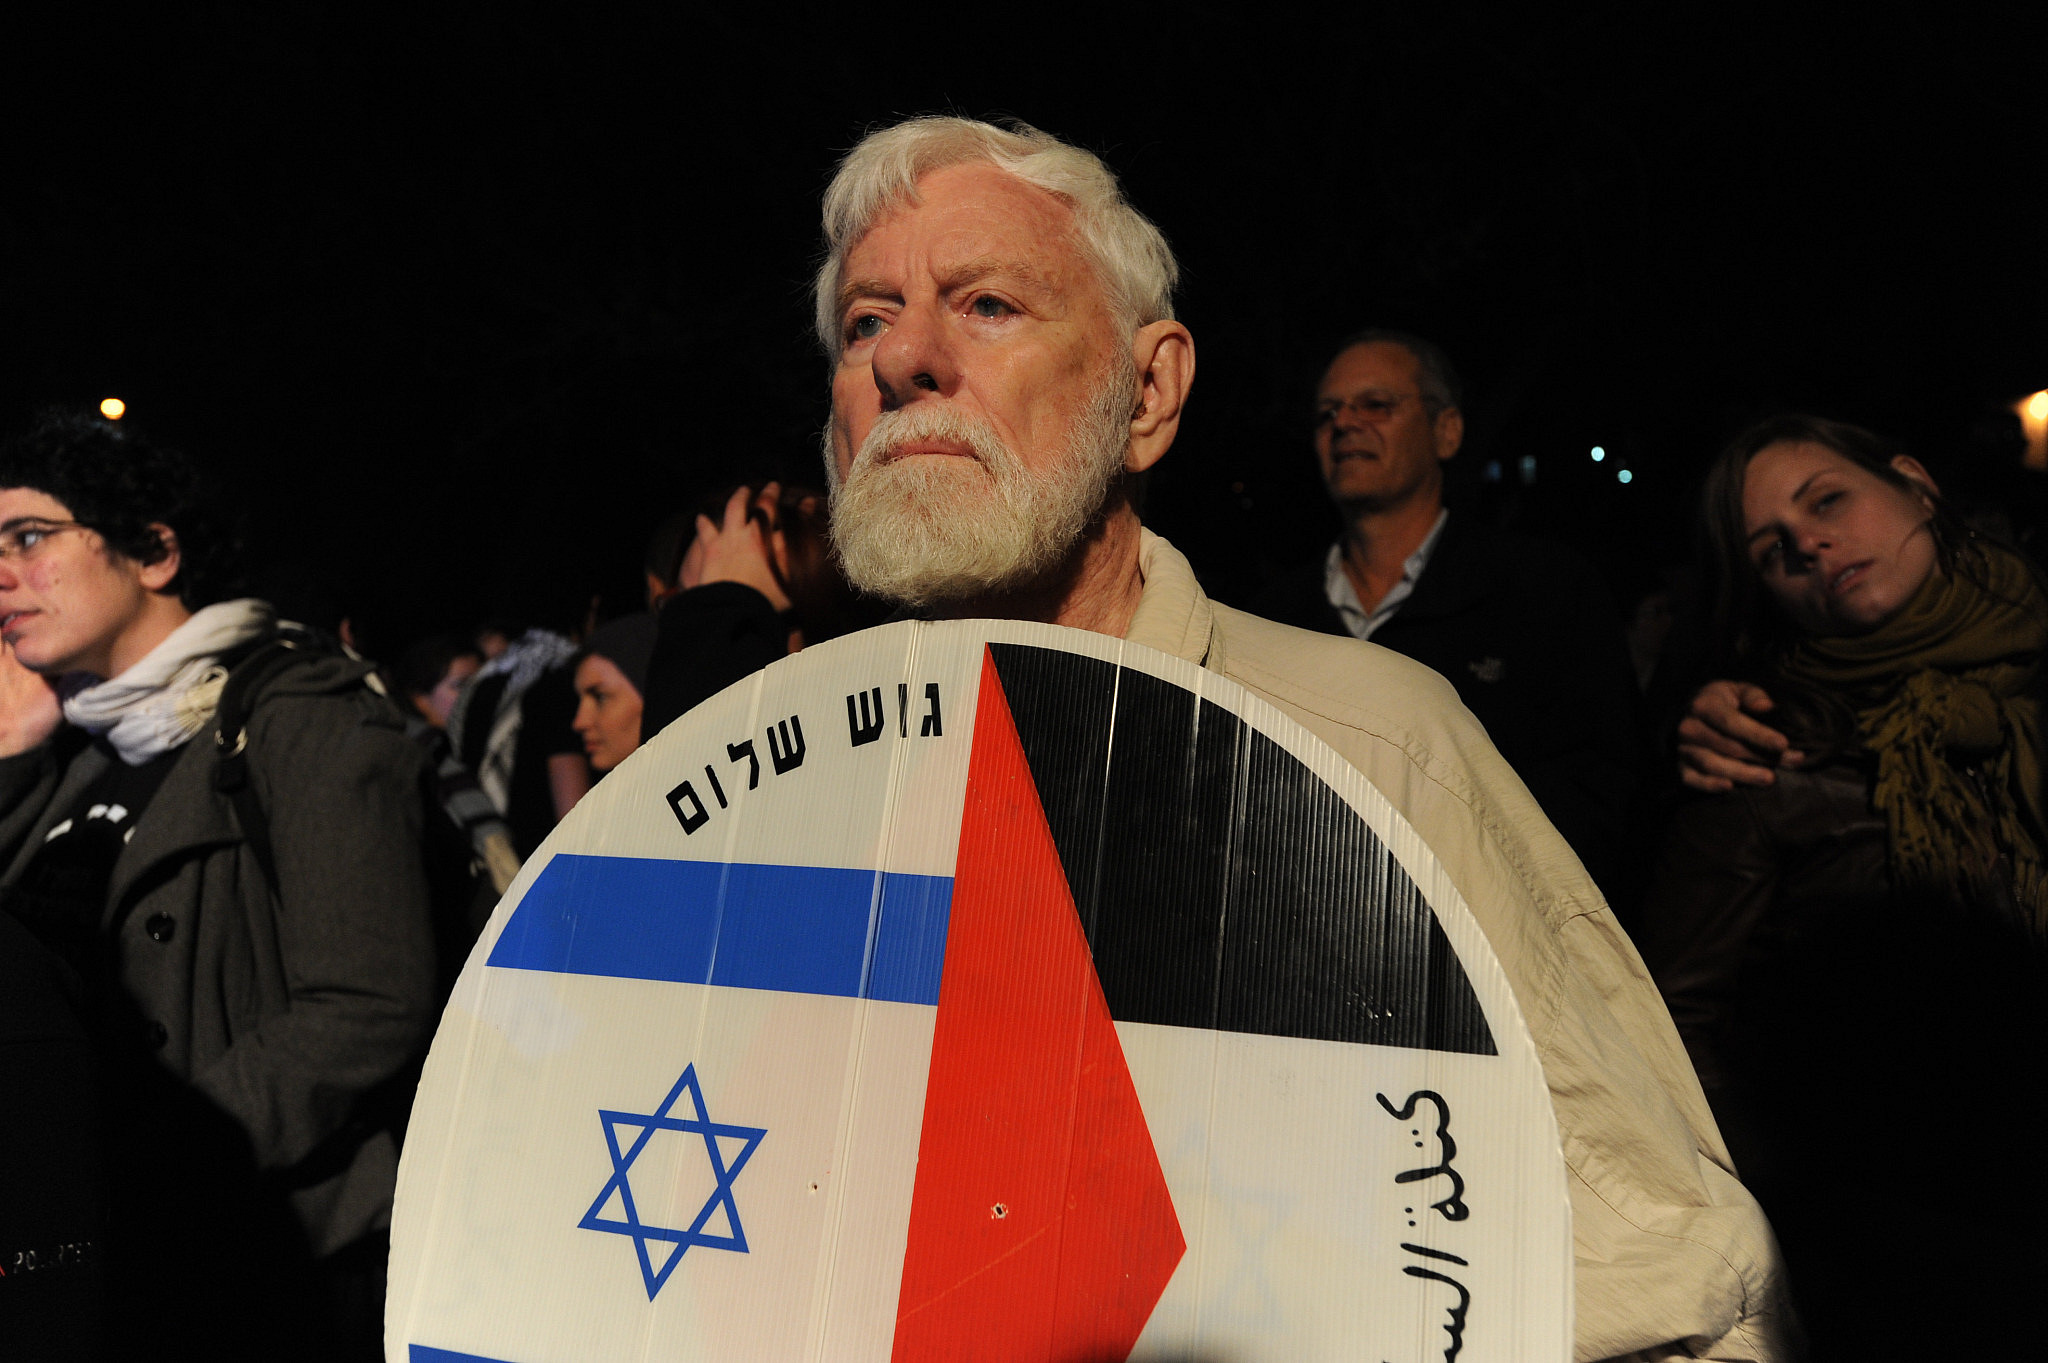 Uri Avnery stands alongside Palestinian and left-wing activists during a protest against Israeli settlement activity in the Sheikh Jarrah neighbourhood of East Jerusalem, March 06, 2010. (Gili Yaari/Flash 90)